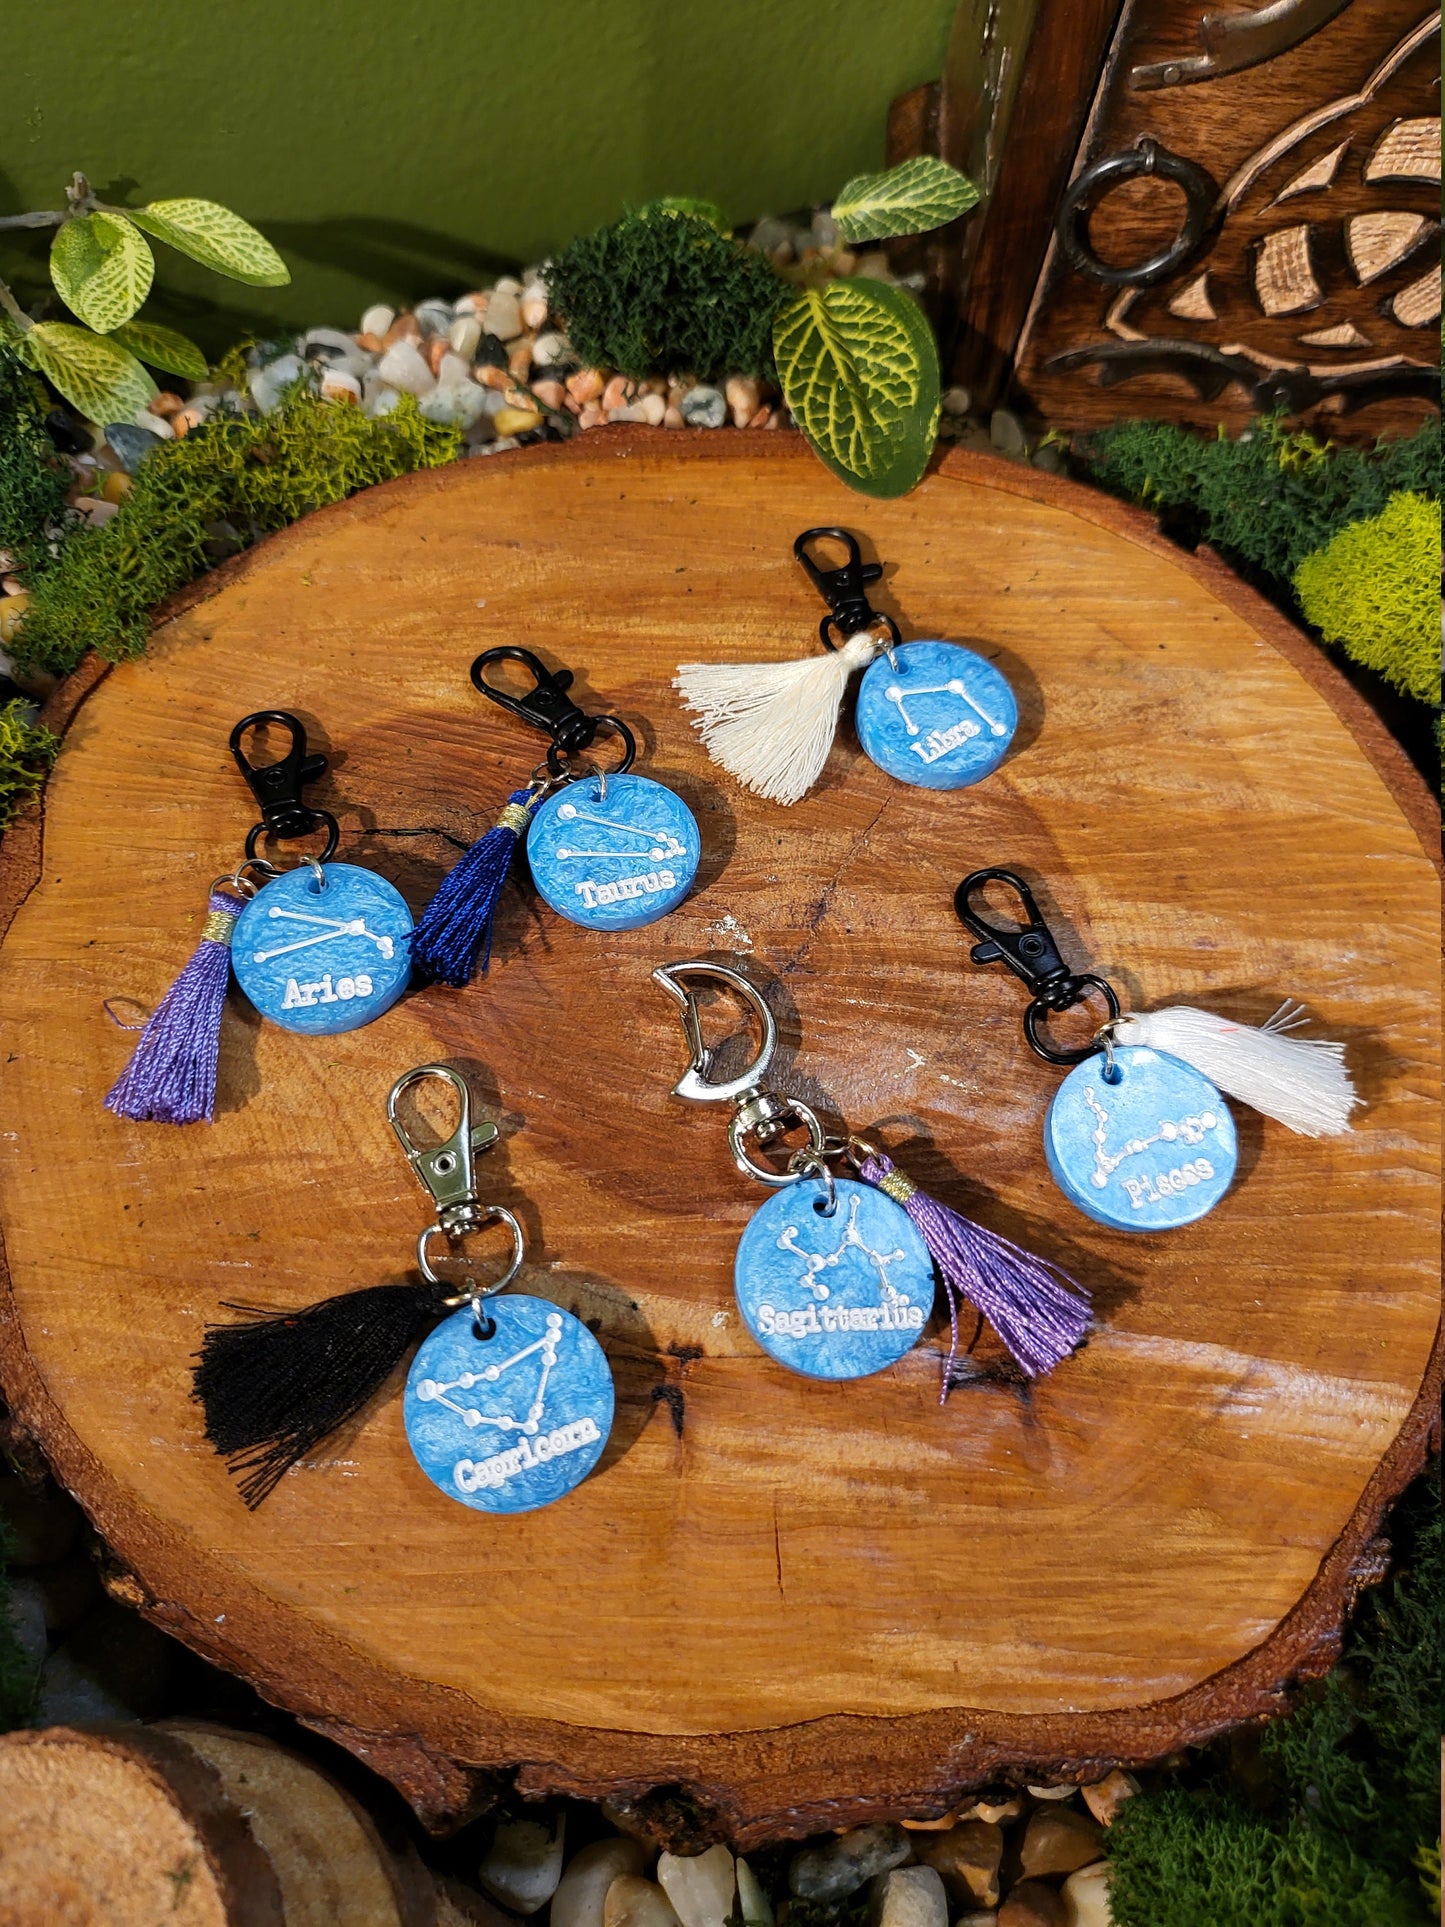 Light Blue and White Astrological Keychains with Charms